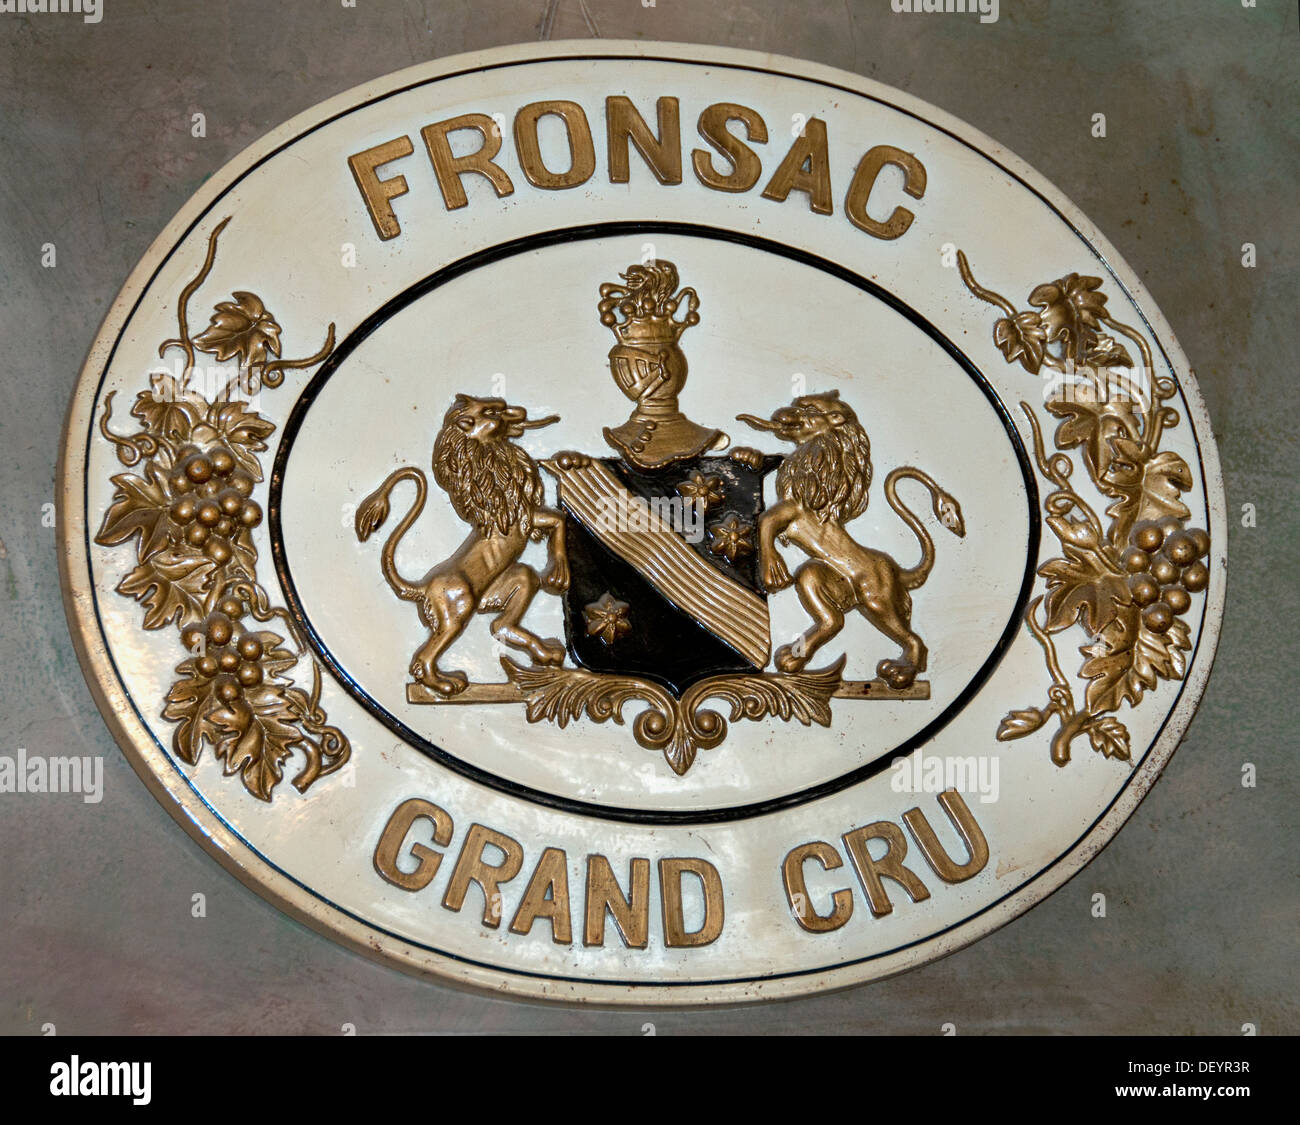 Fronsac Grand Cru Sign winery France French Wine Stock Photo